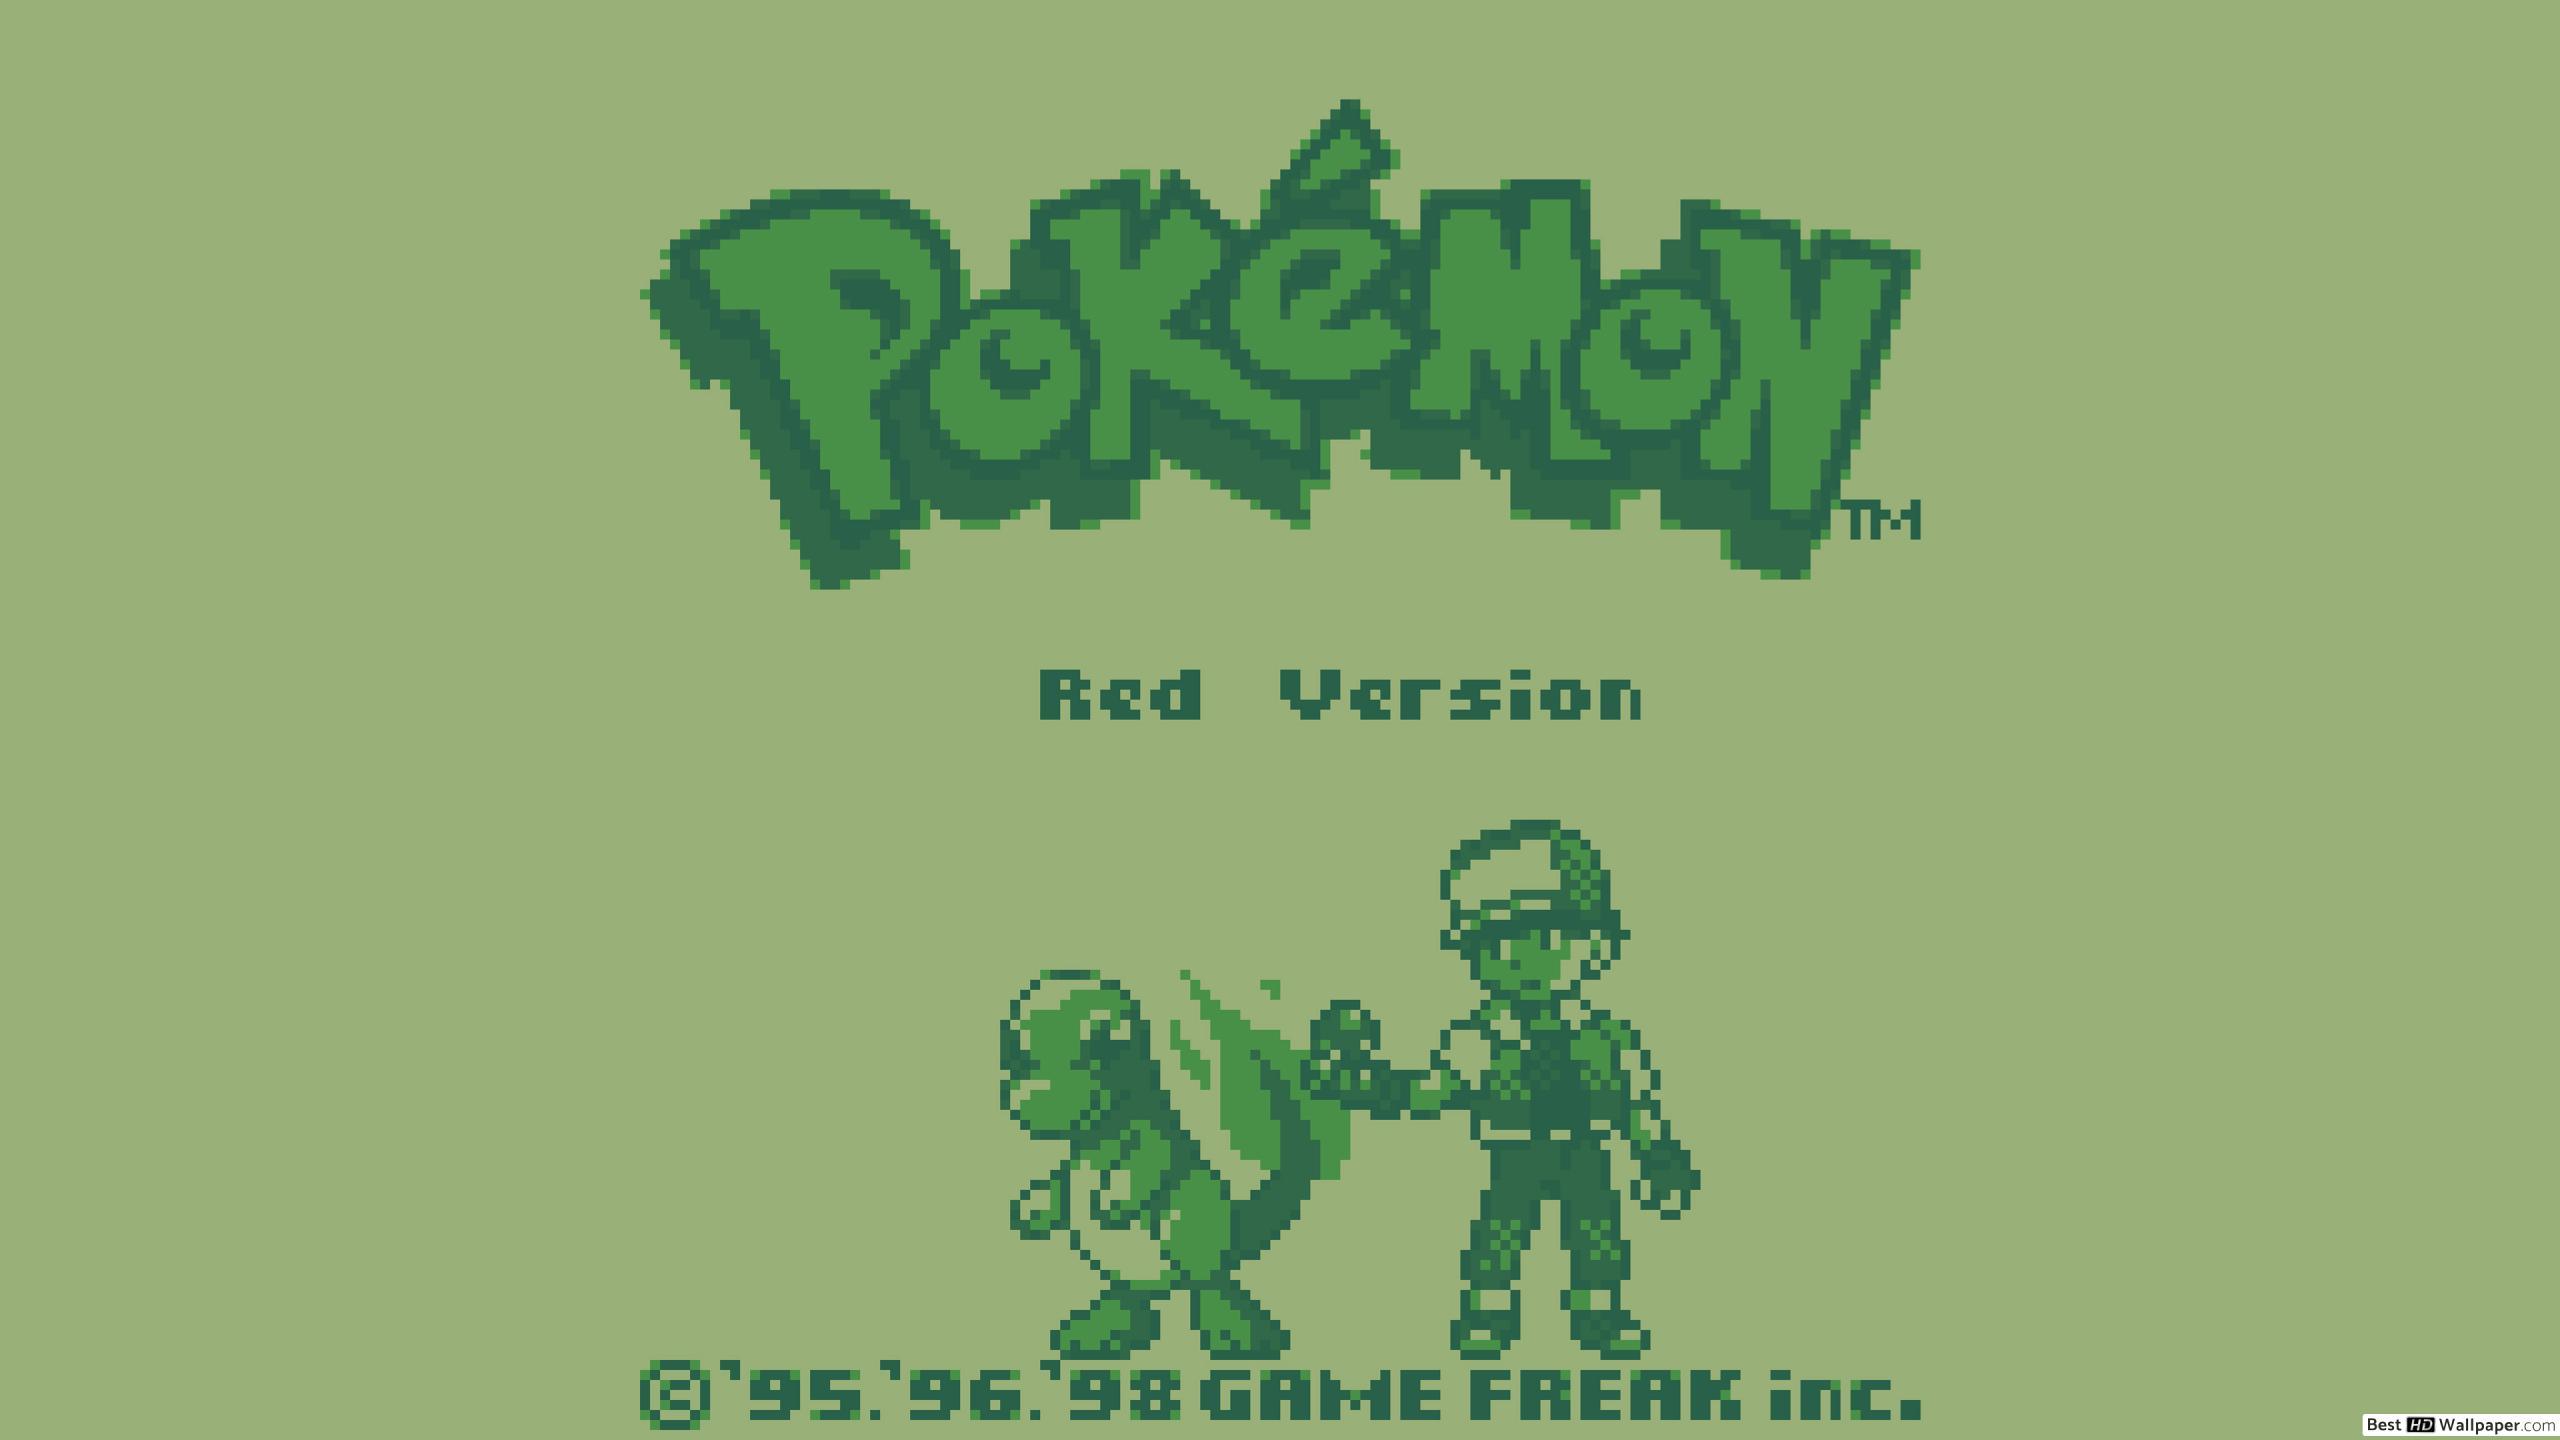 Pokémon Red and Blue HD wallpaper download